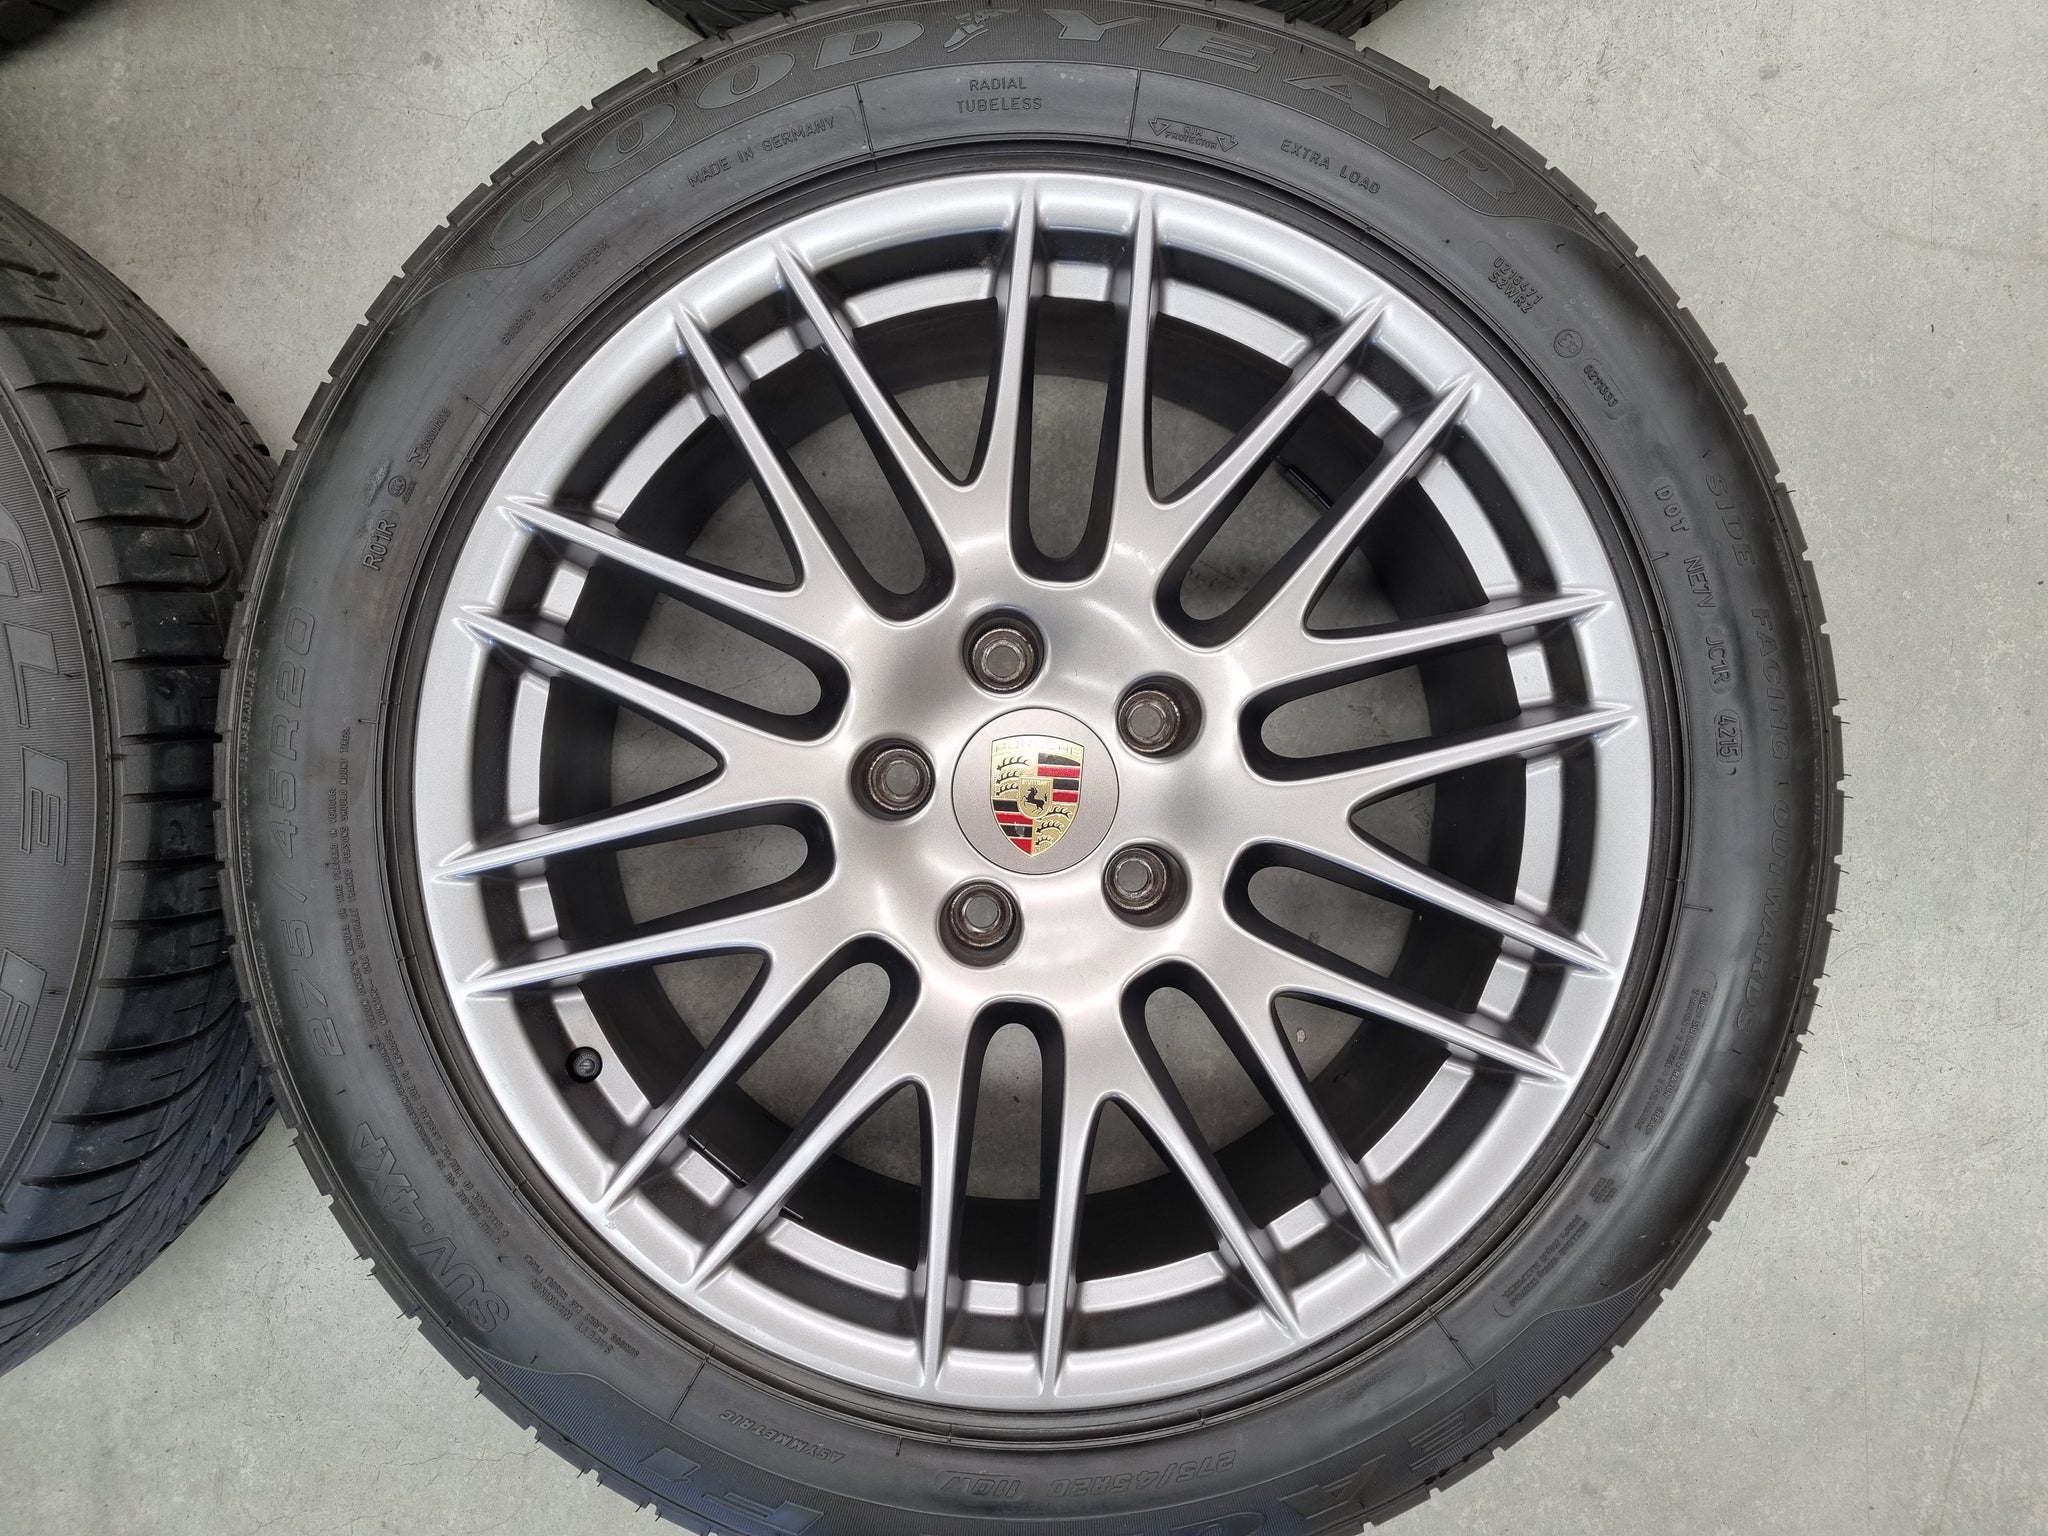 Load image into Gallery viewer, Genuine Porsche Cayenne Spyder 20 Inch Wheels and Tyres Set of 4
